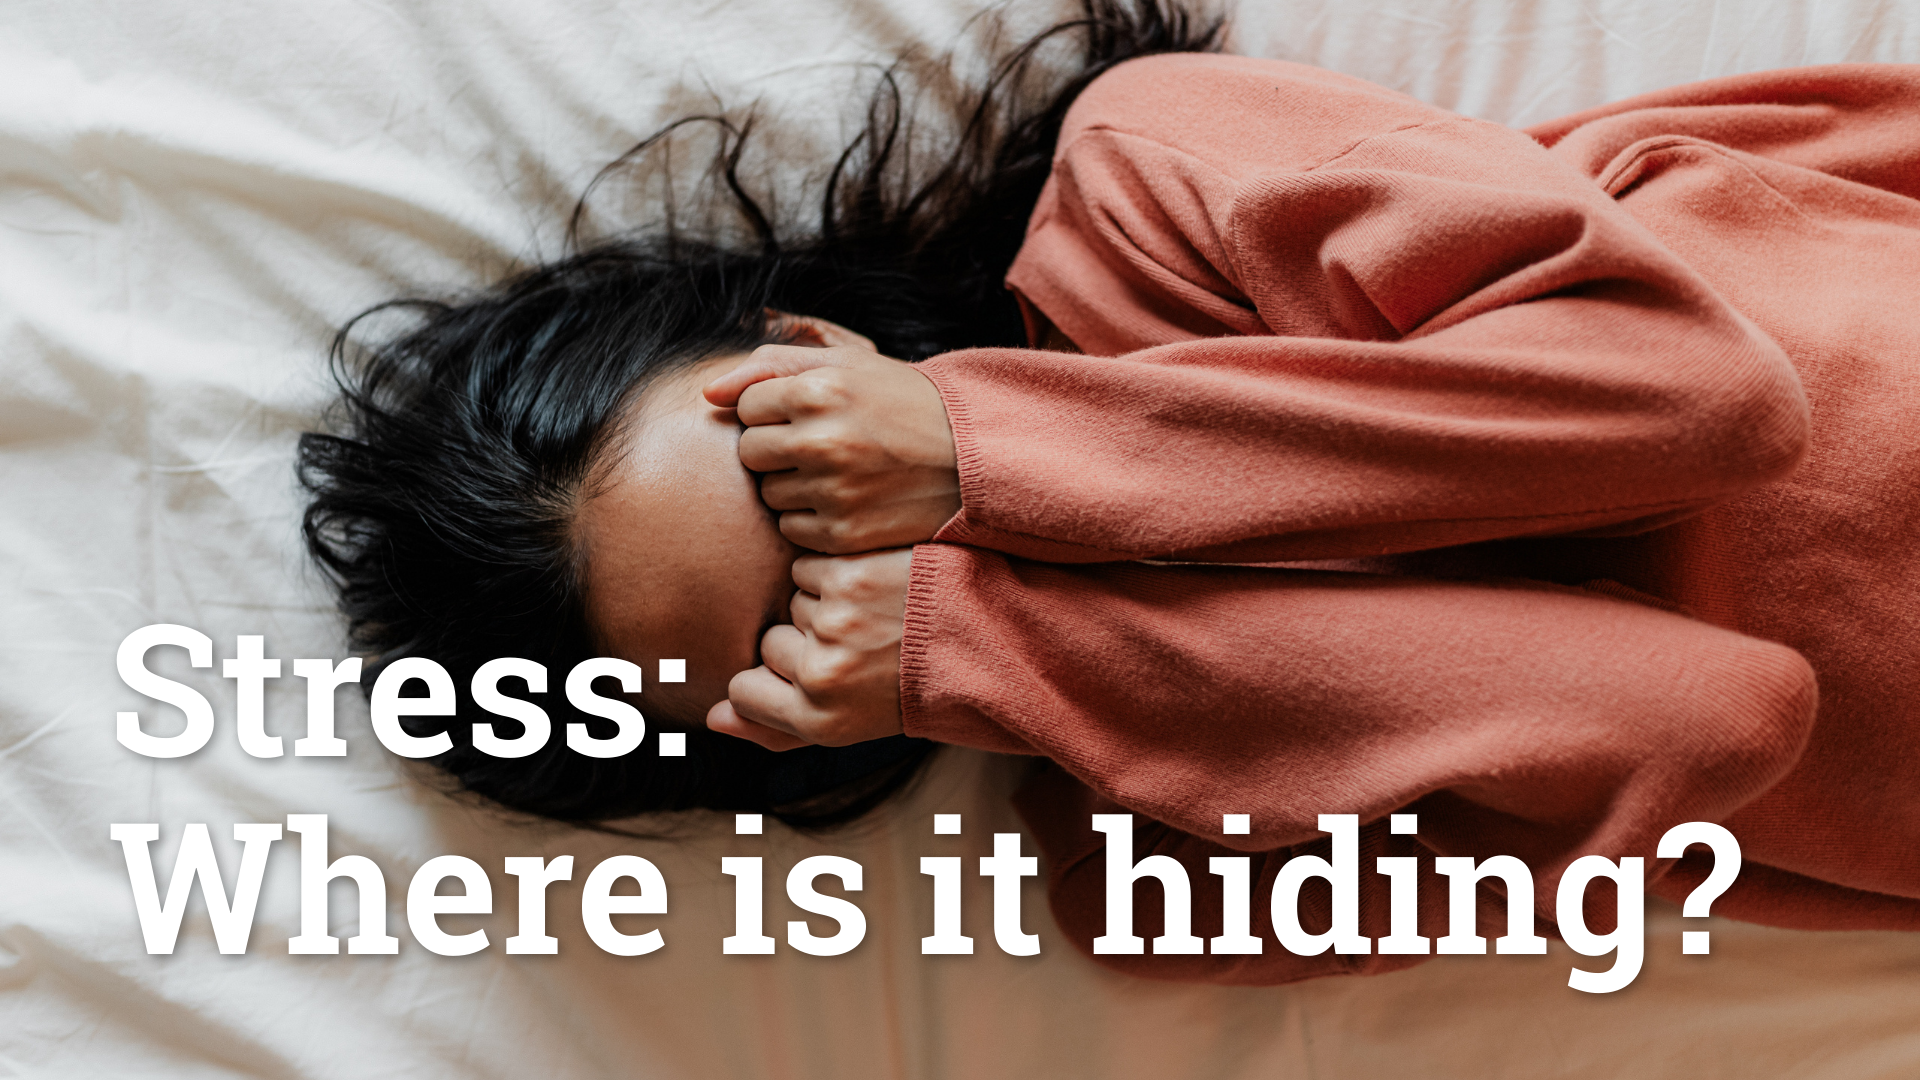 Stress: Where is it hiding?